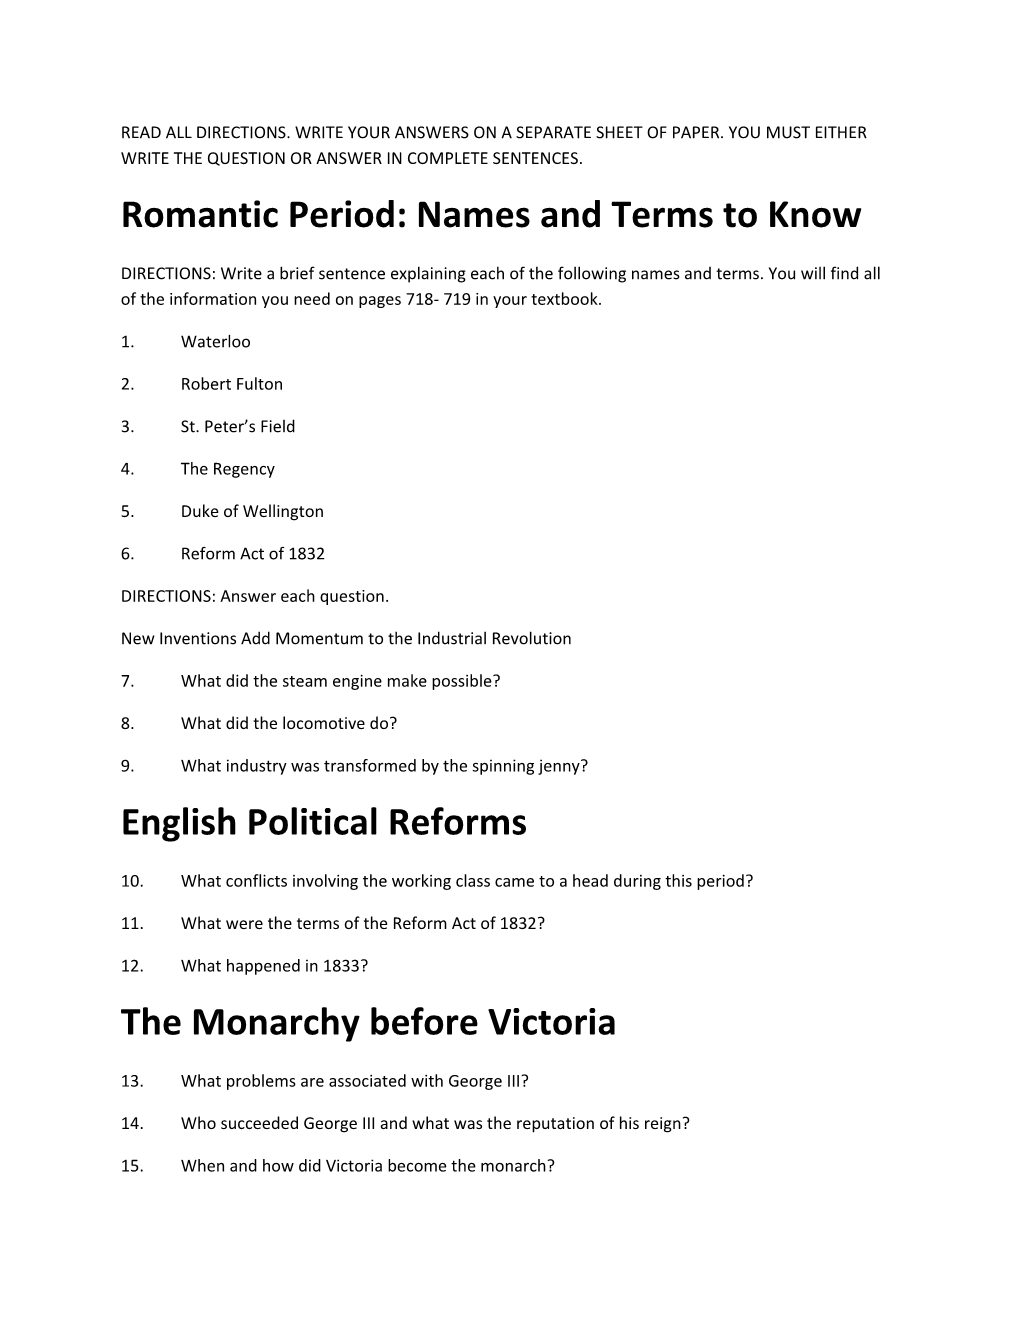 Romantic Period: Names and Terms to Know